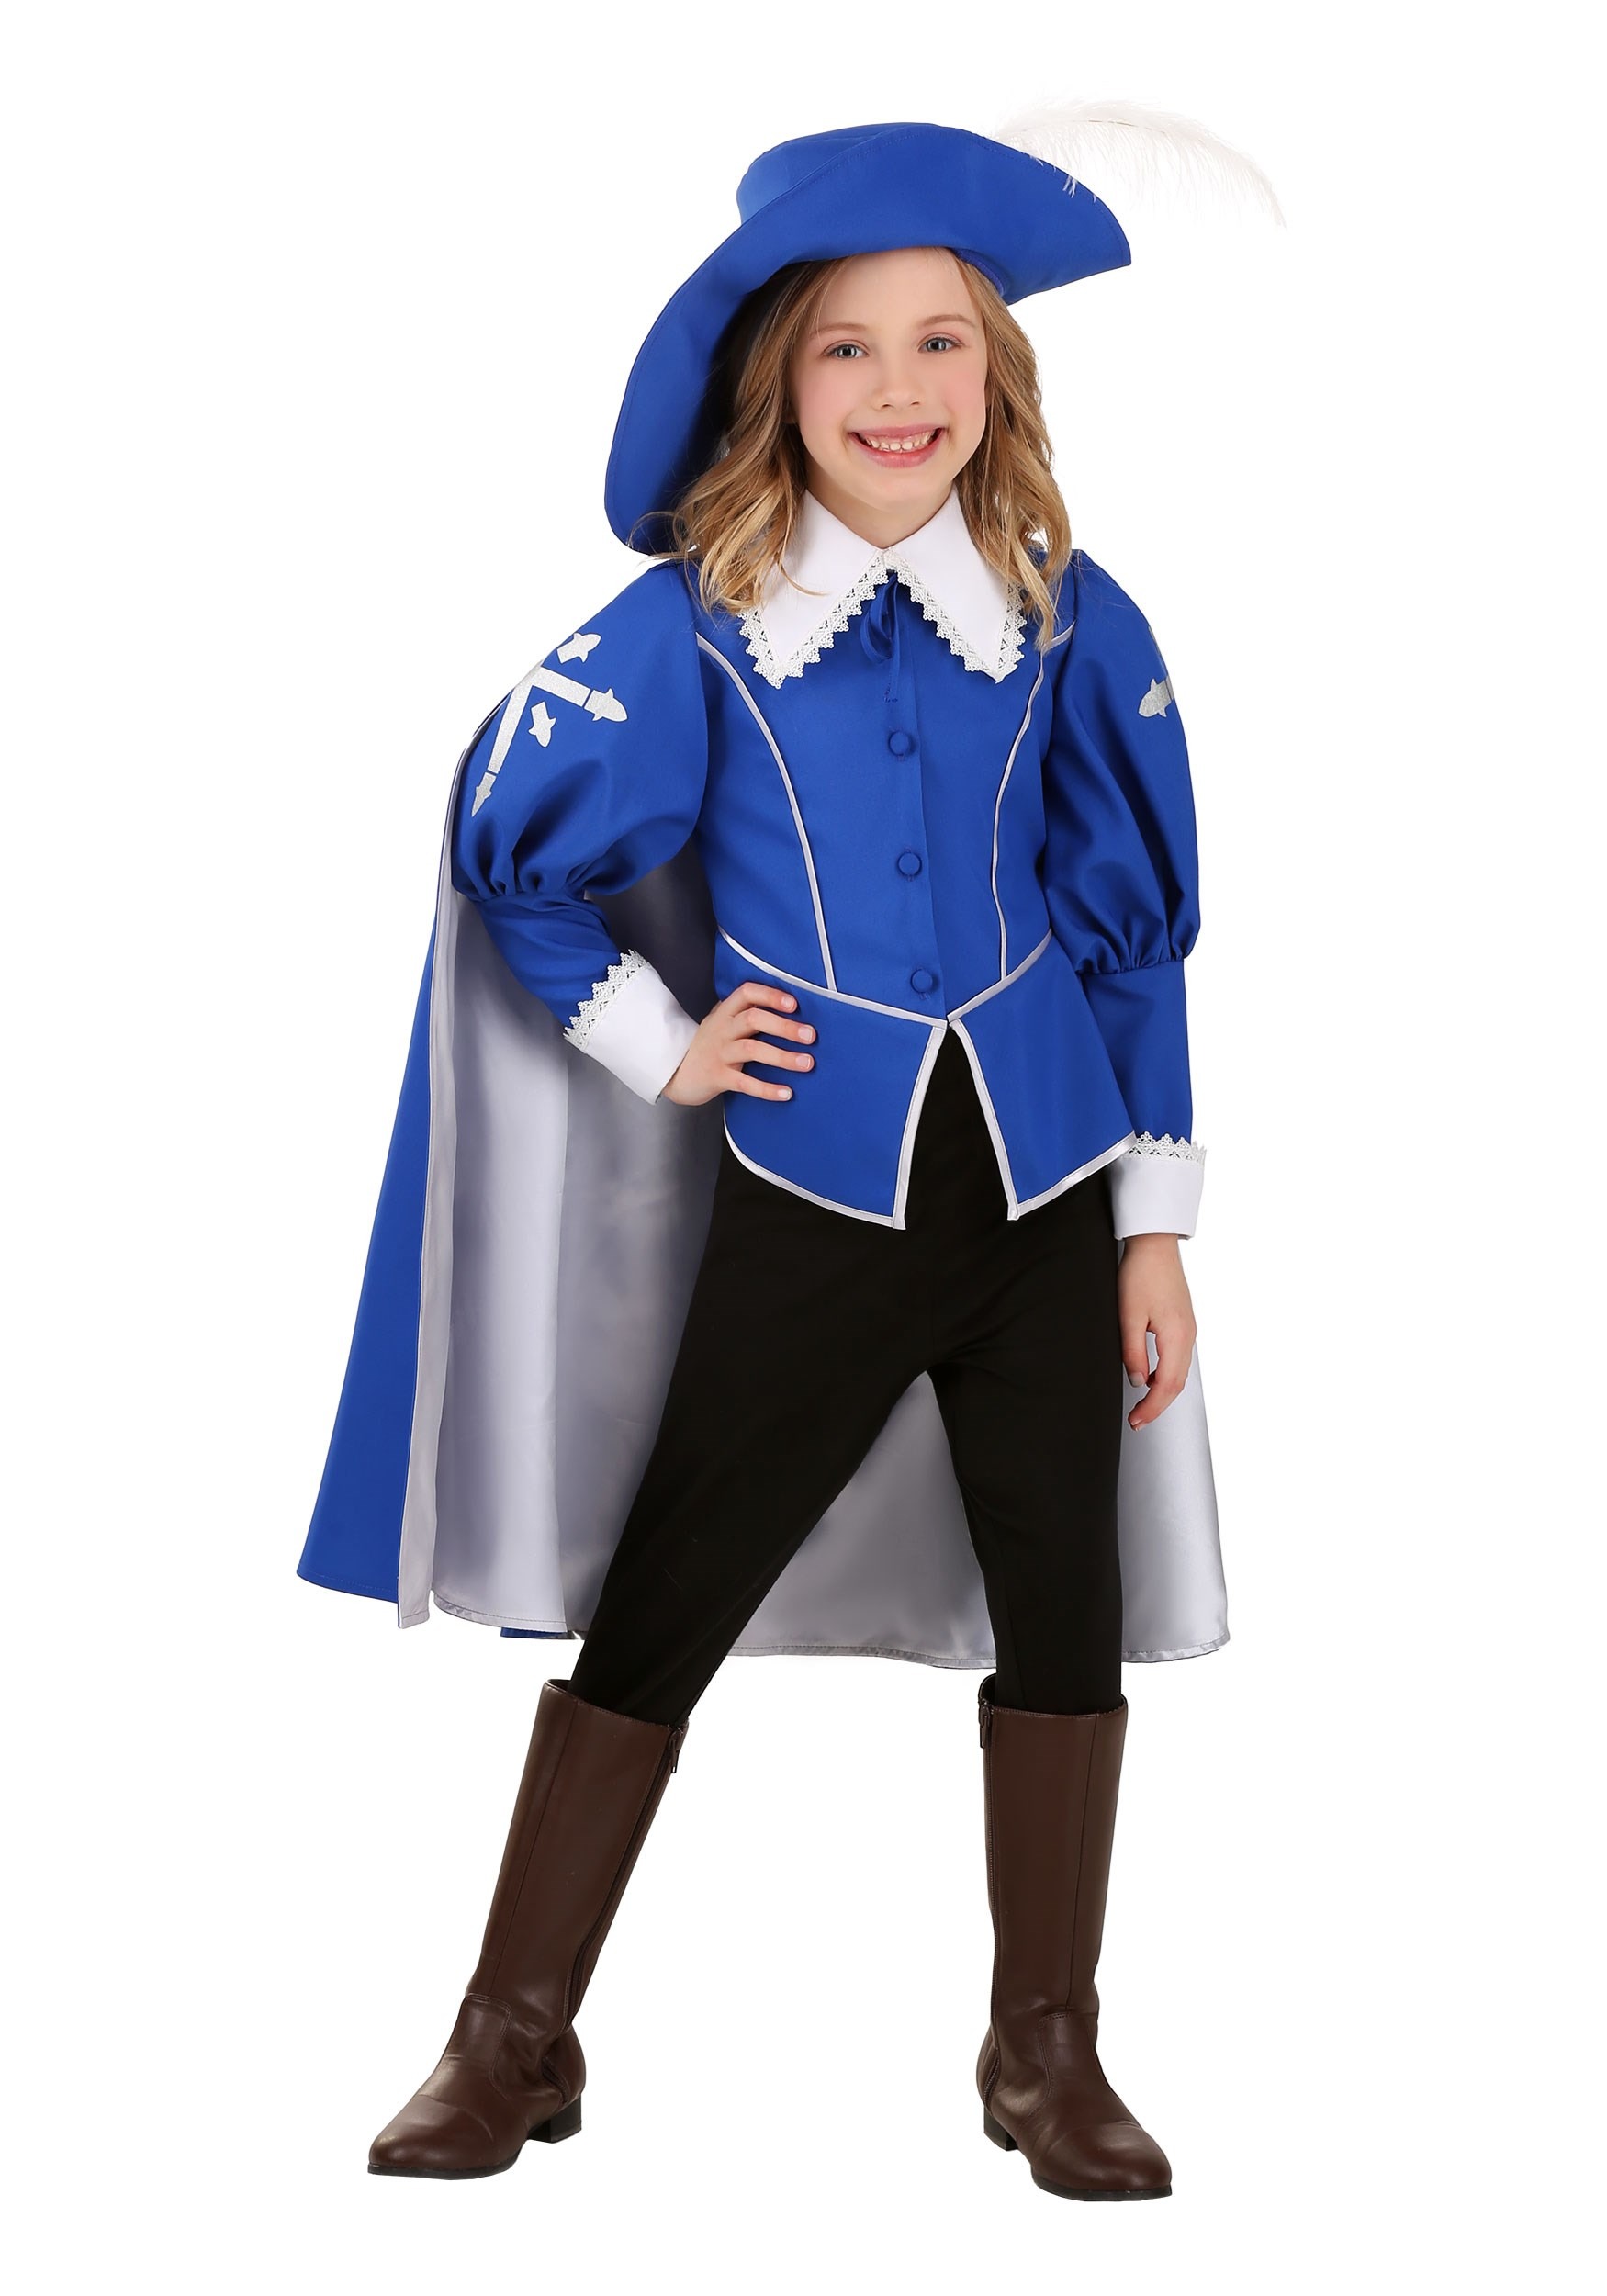 Photos - Fancy Dress FUN Costumes Musketeer Girl's Costume Blue/Gray/White